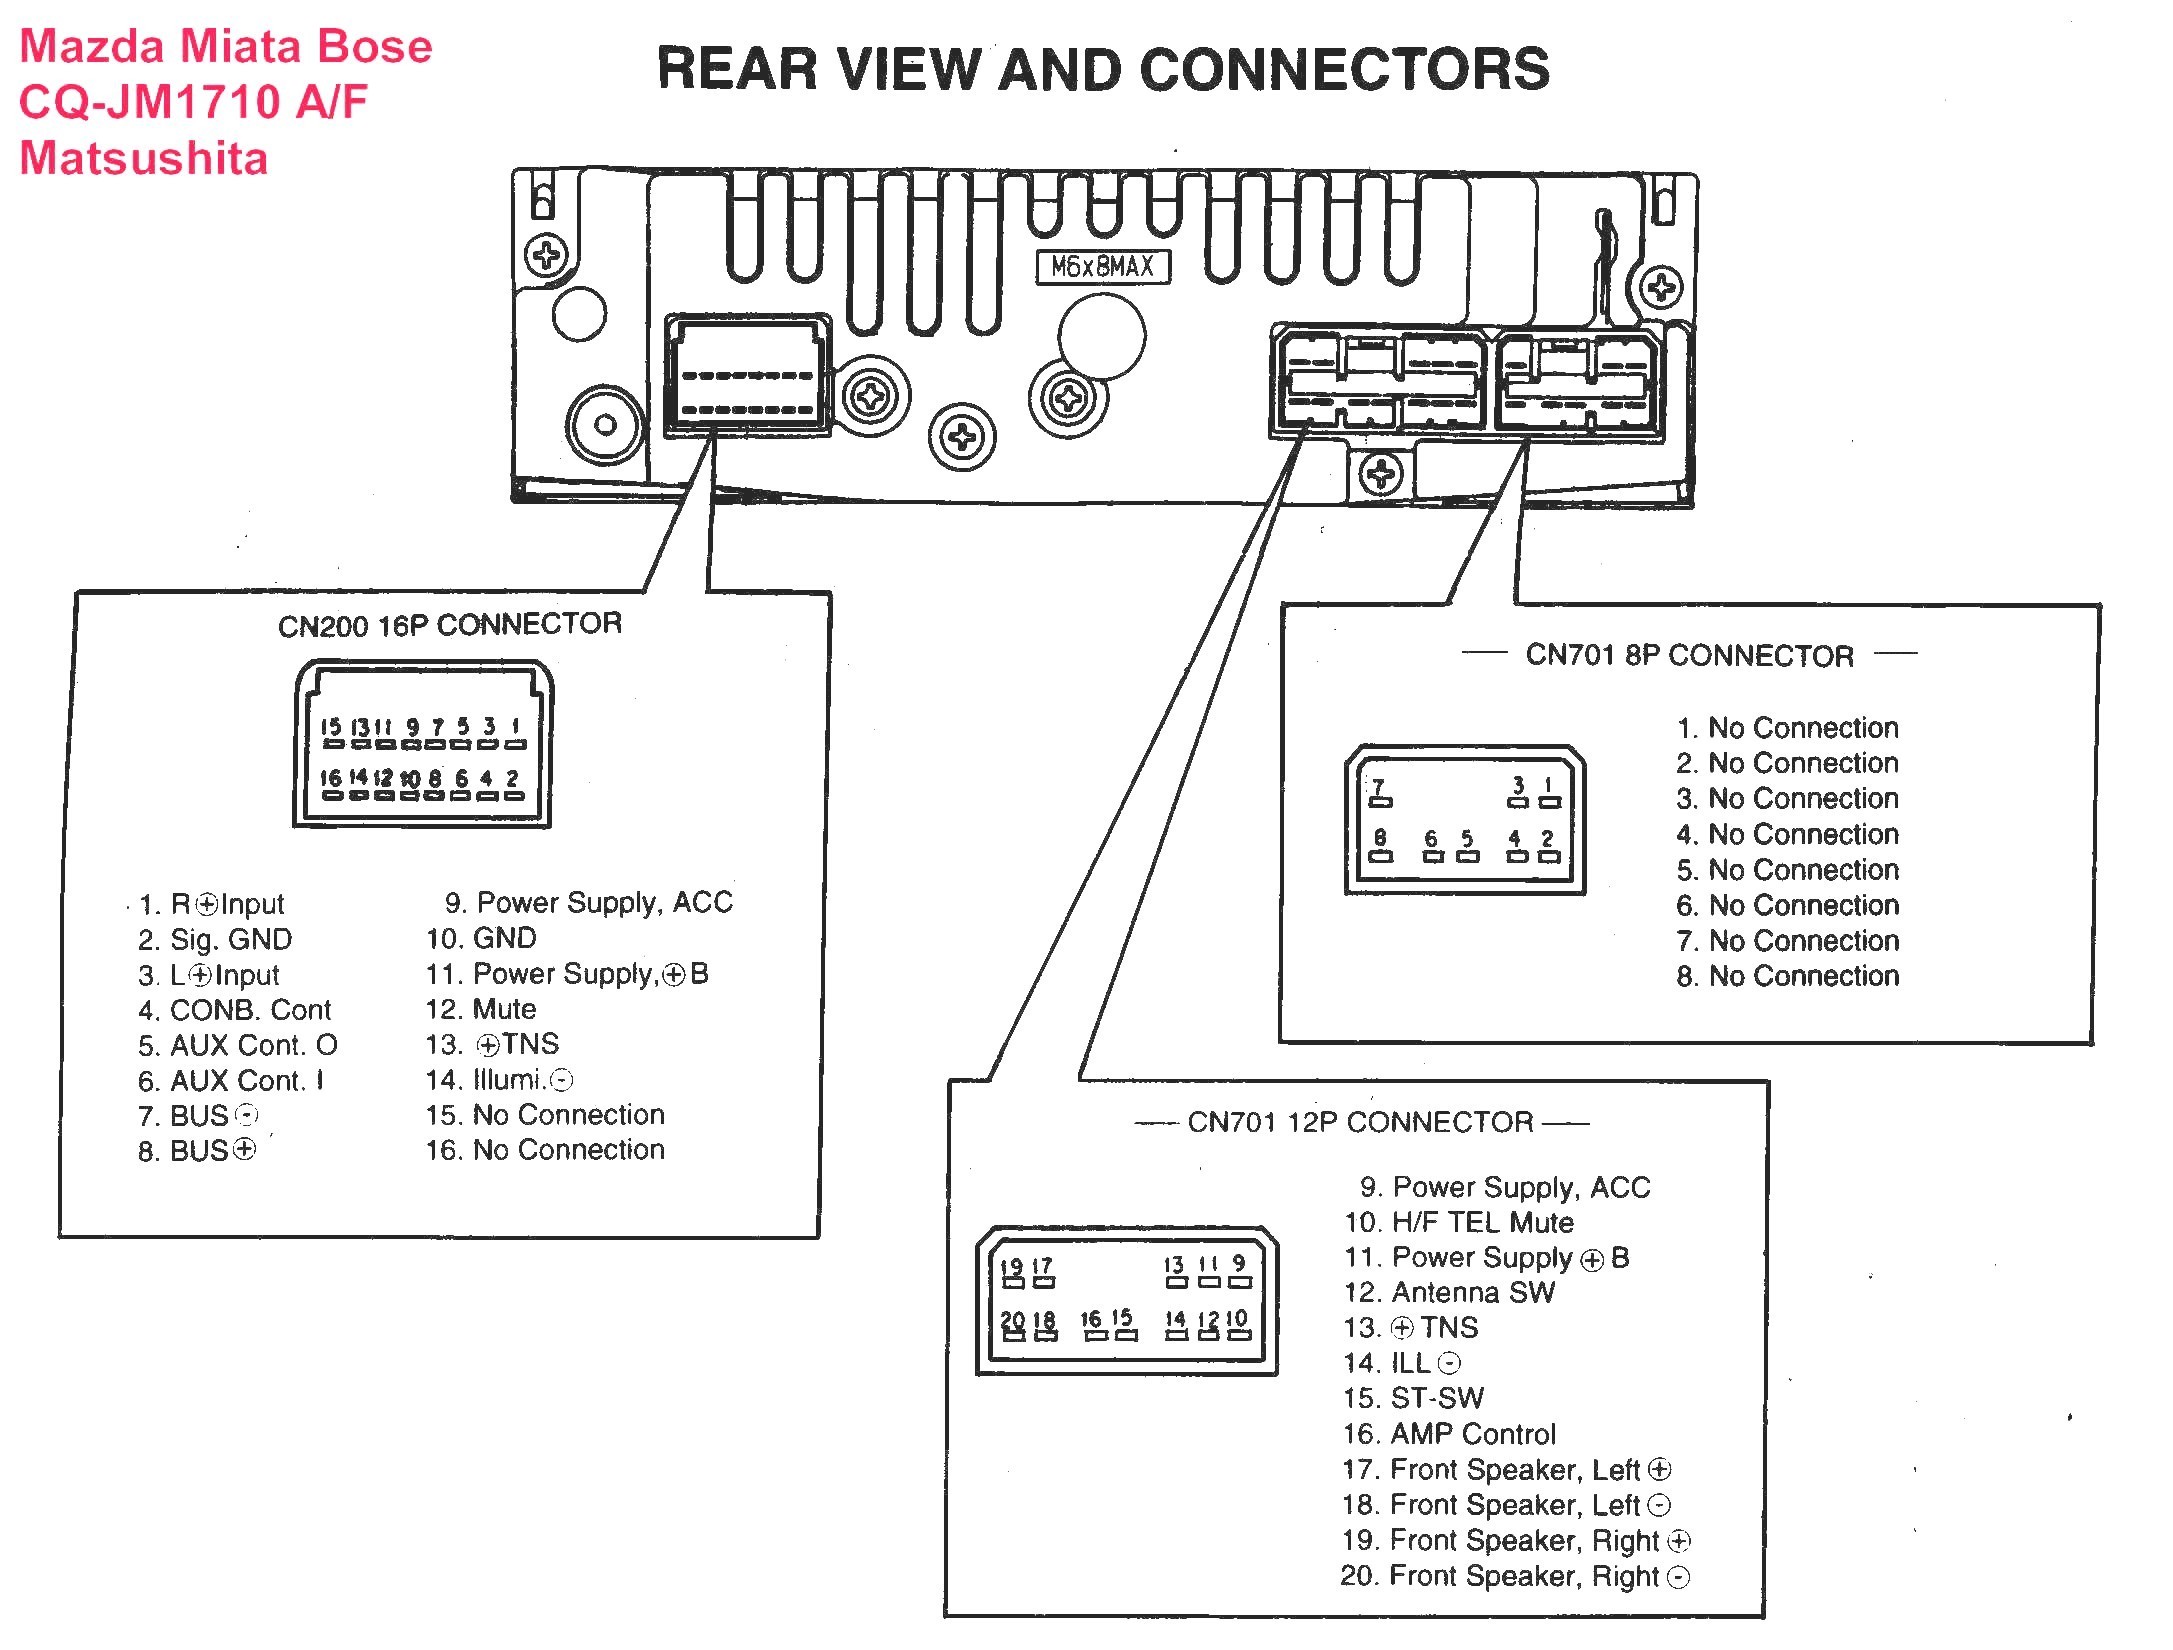 Diagram Of Wiring For Head Unit